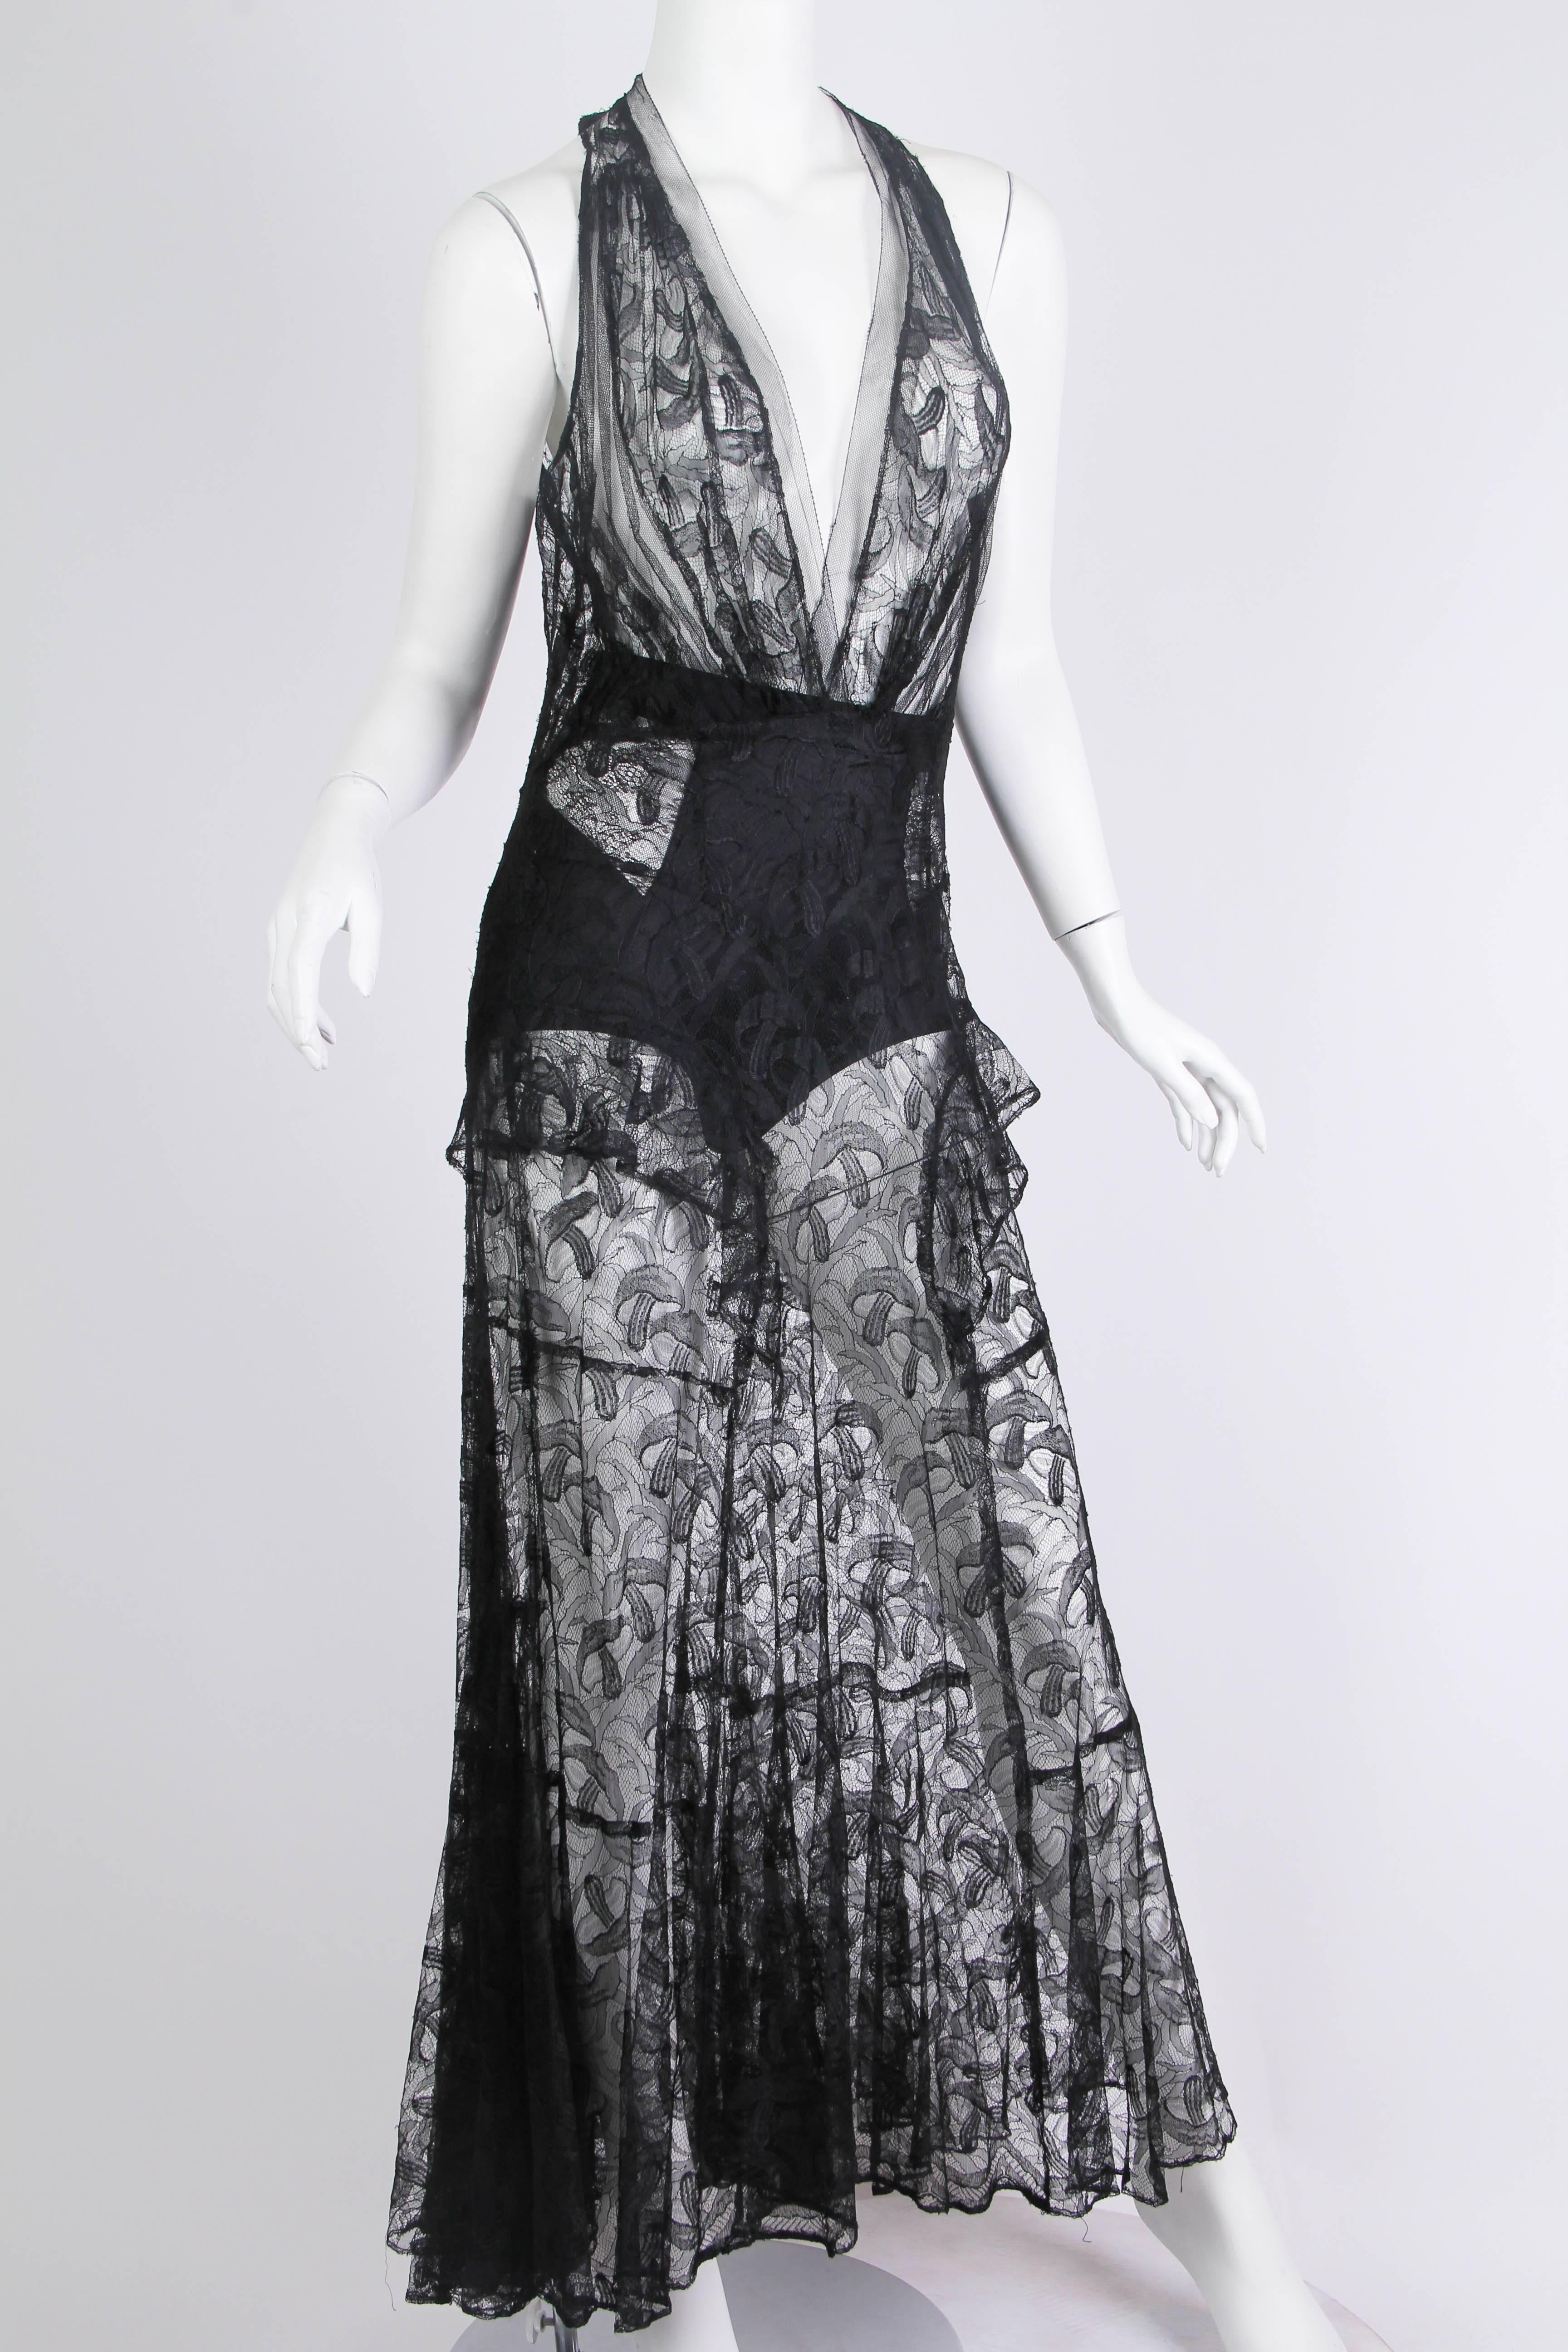 This gorgeous gown is even more amazing when one looks up close and takes in the mushrooms in the lace. Very rare to find 1930s gowns of this caliber. Under pinnings not included in sale. 